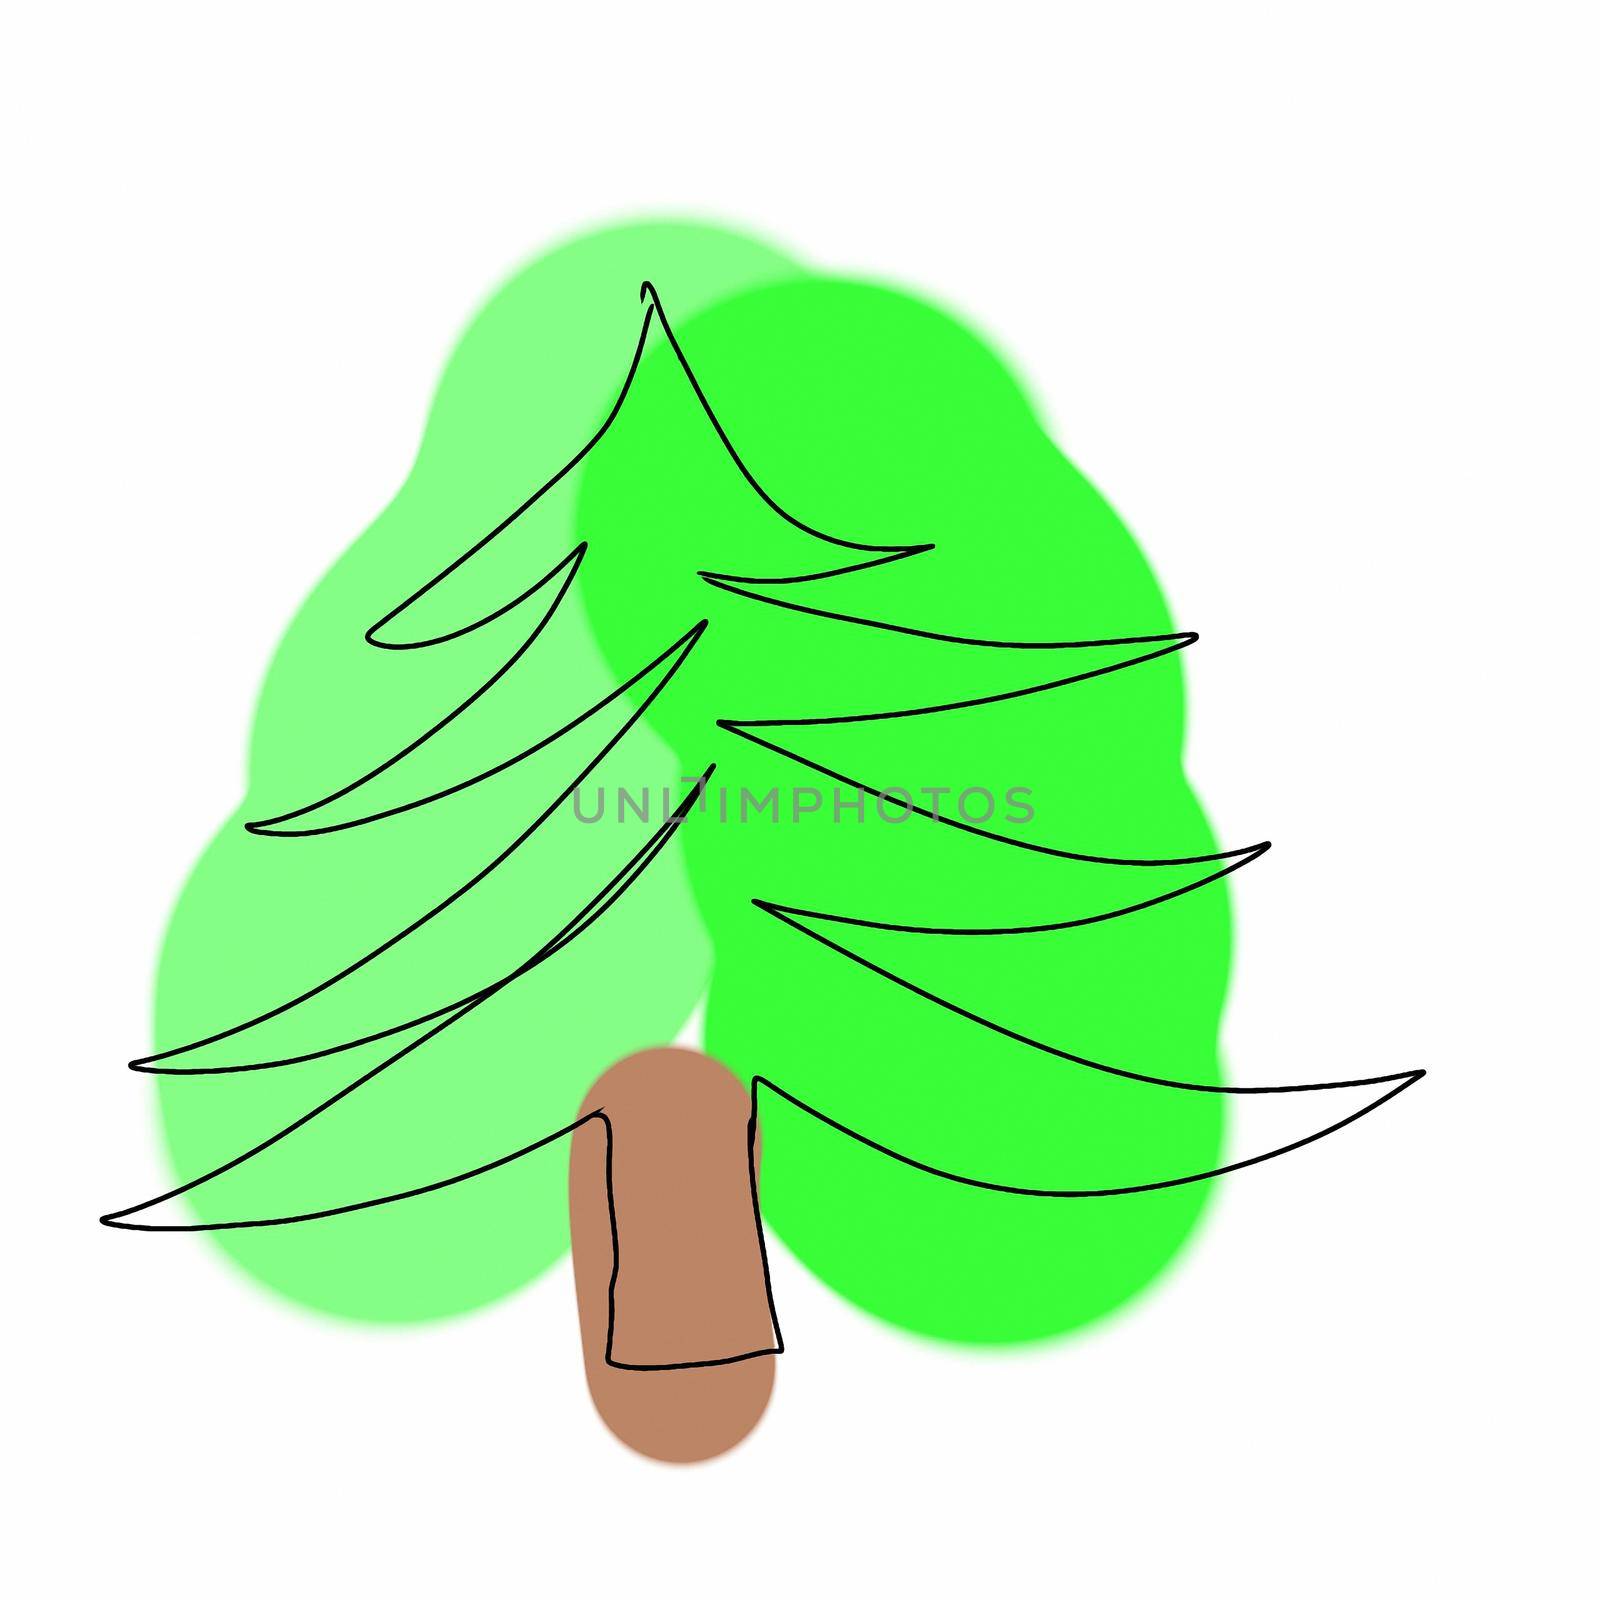 Isolated image of fir. Green pine in cartoon style. Forest tree on white background